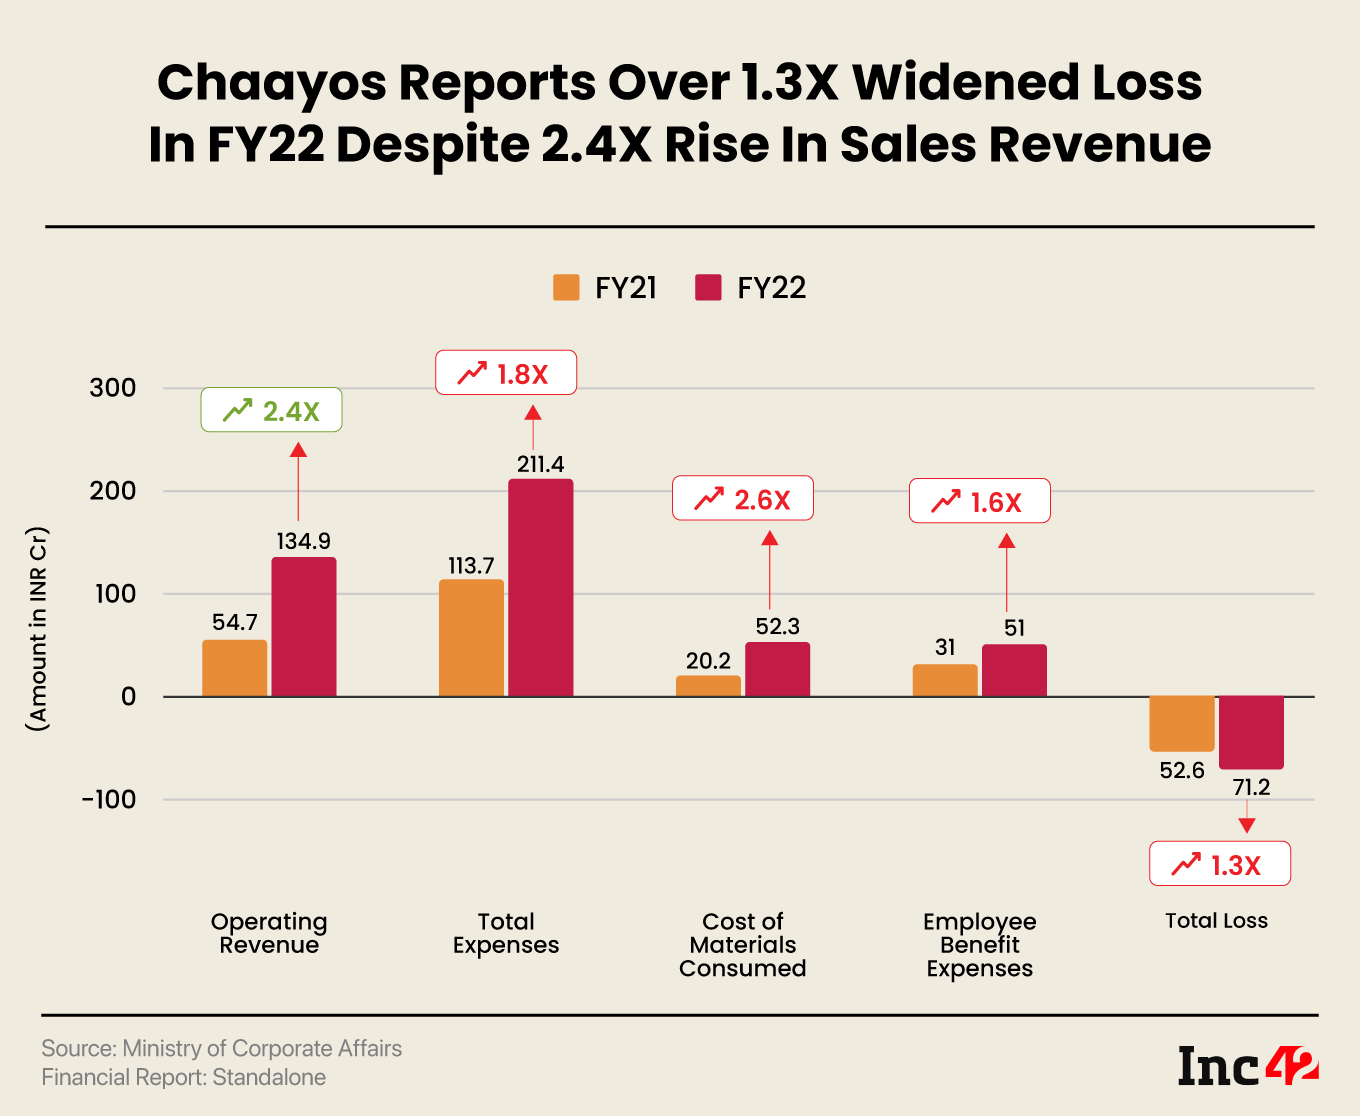 Chaayos reports over 1.3X widened loss in FY22 despite 2.4X rise in sales revenue